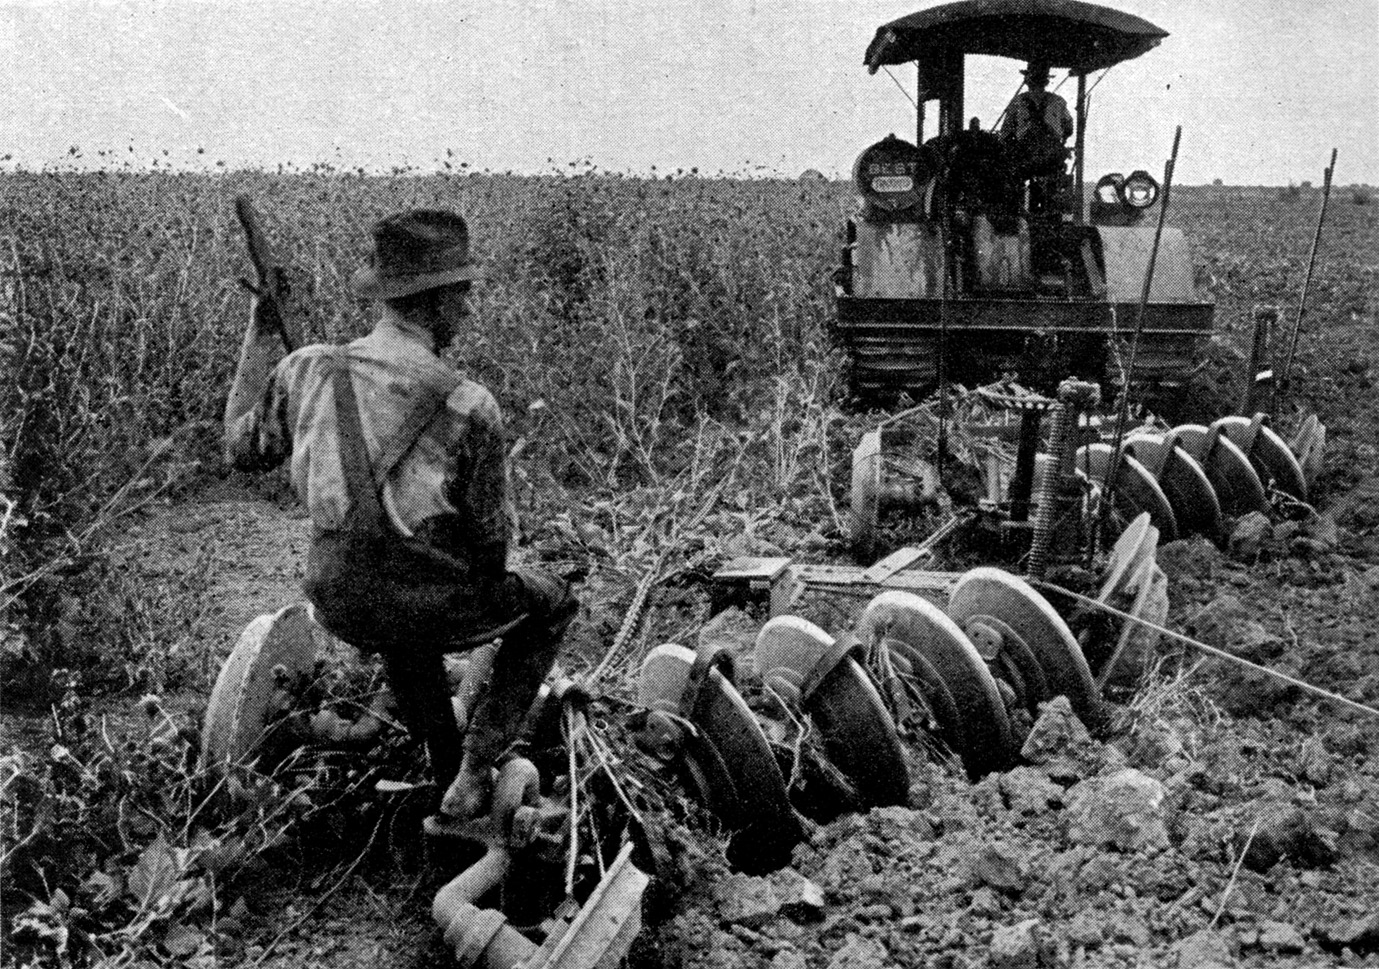 Image of early plowing from Wikipedia